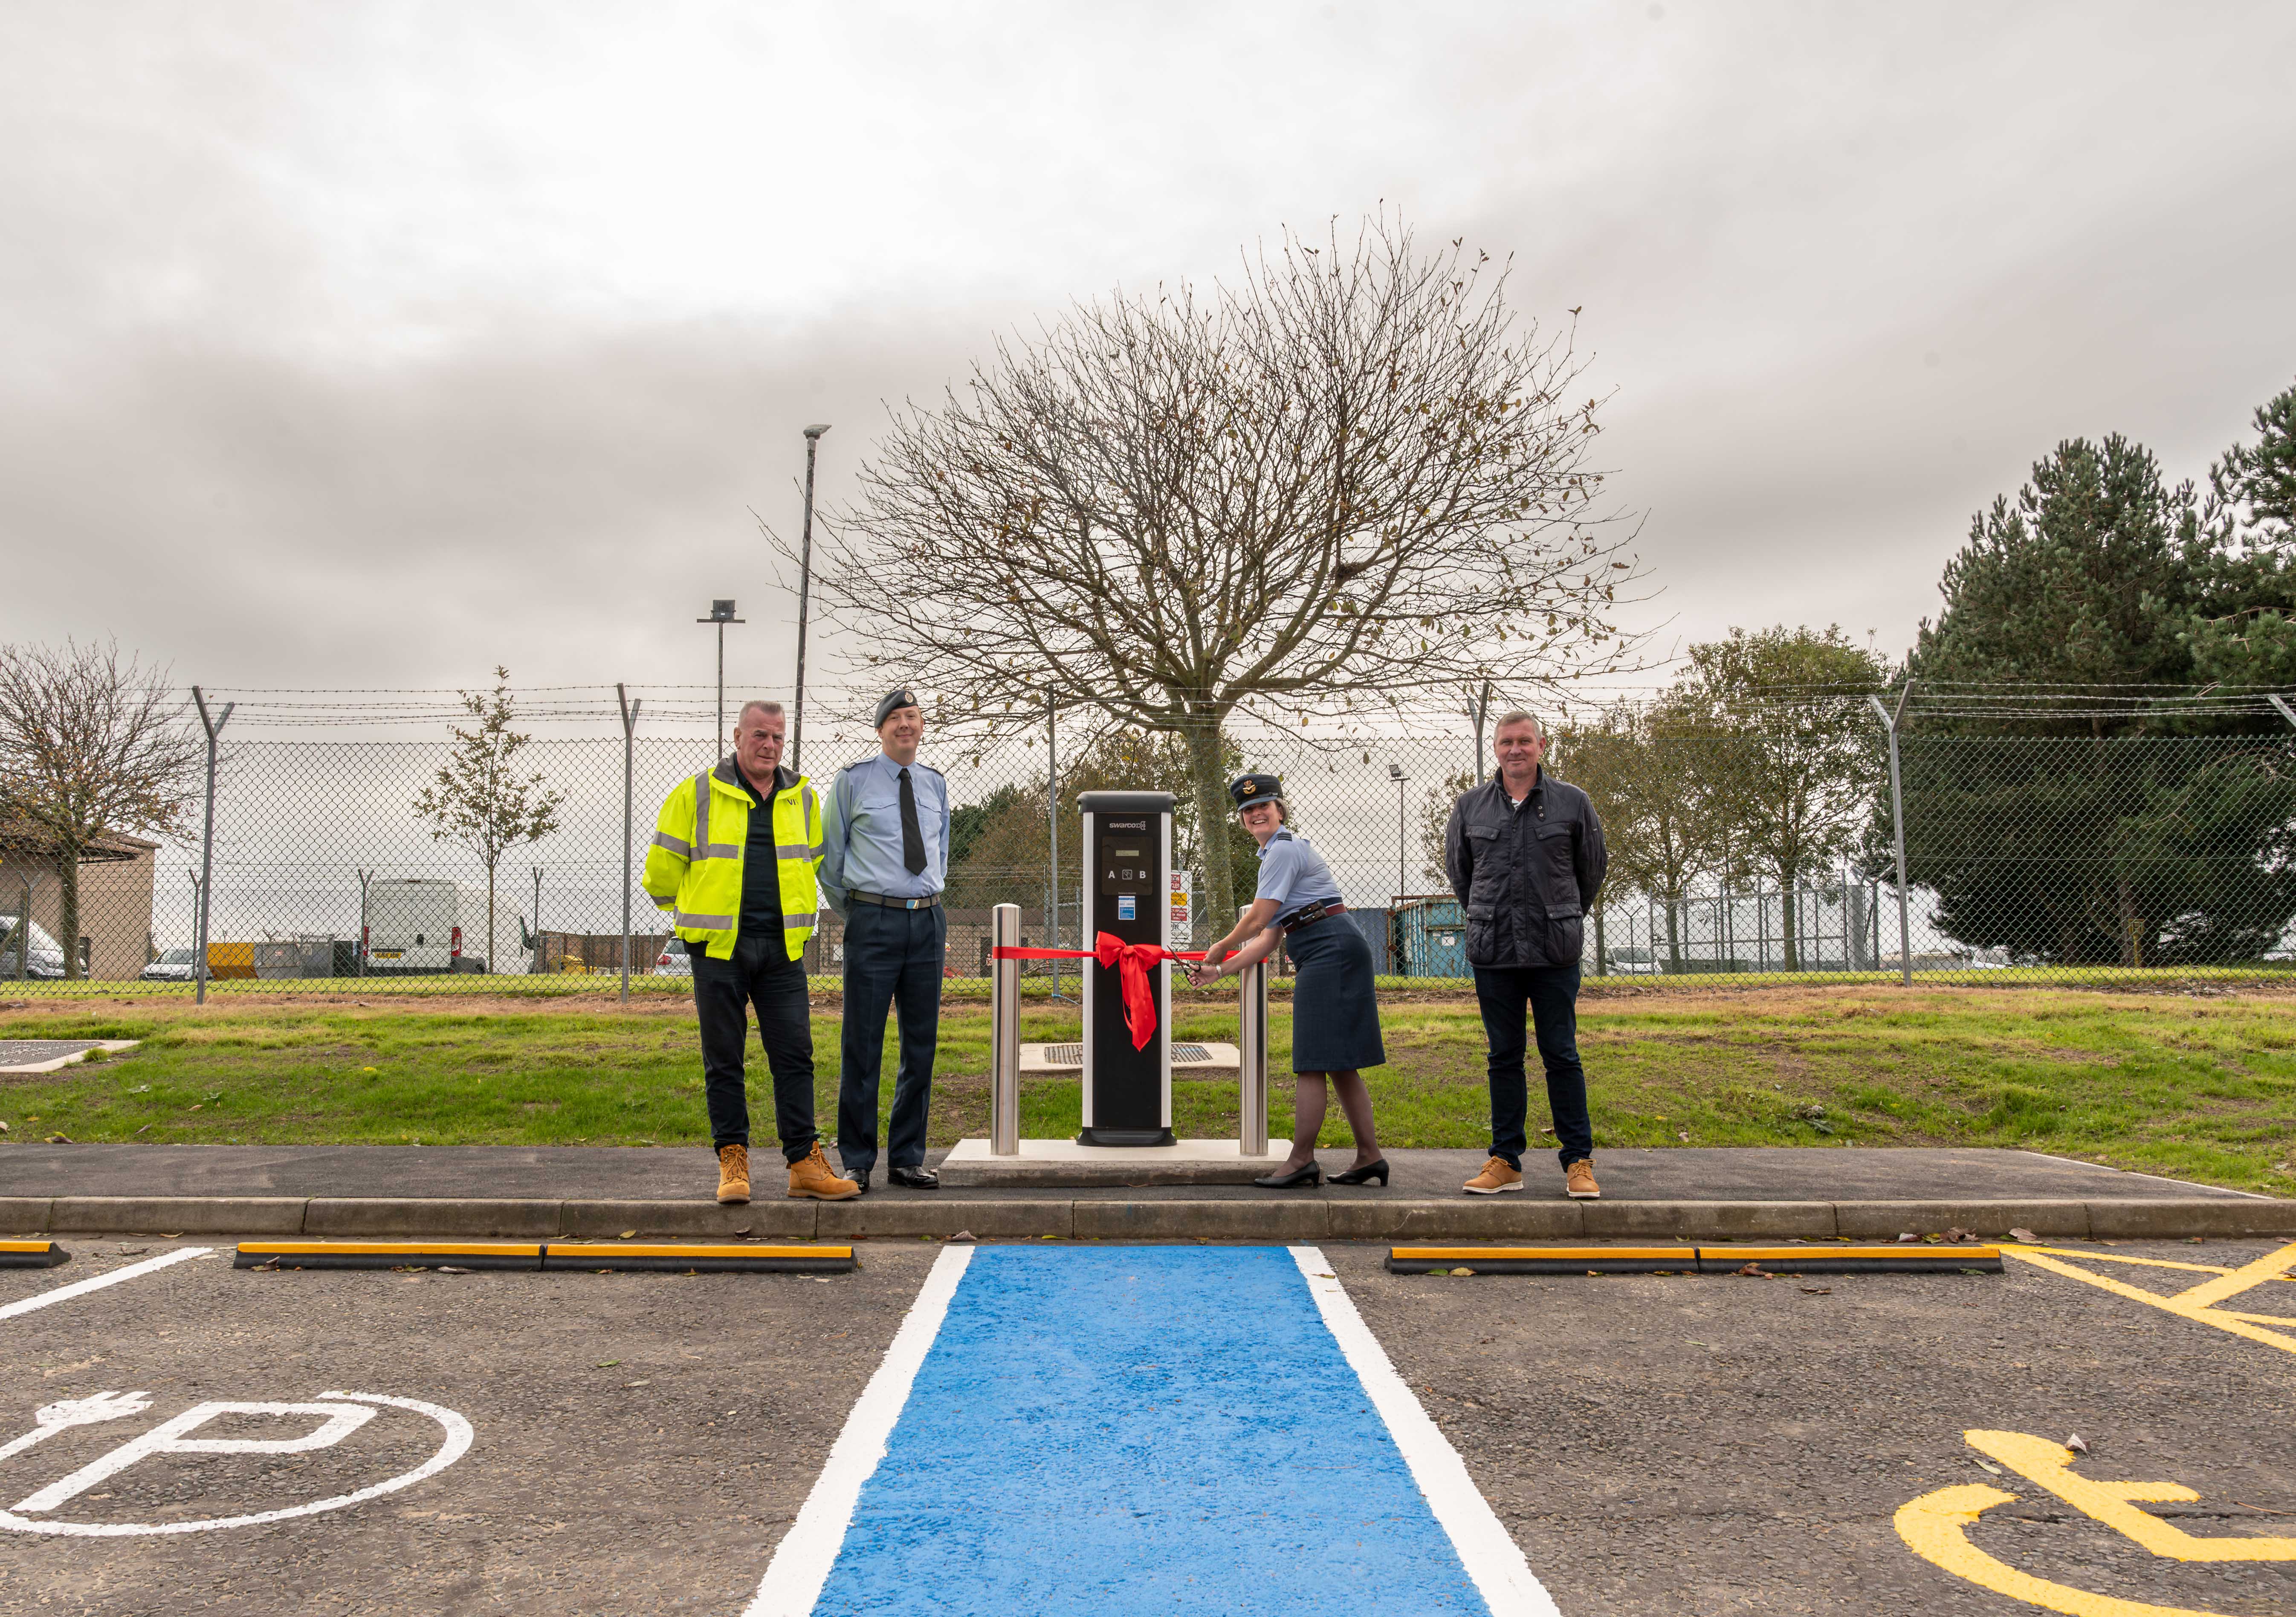 RAF Boulmer hosted an opening ceremony for one of the Station’s Electrical Vehicle (EV) Charging Points